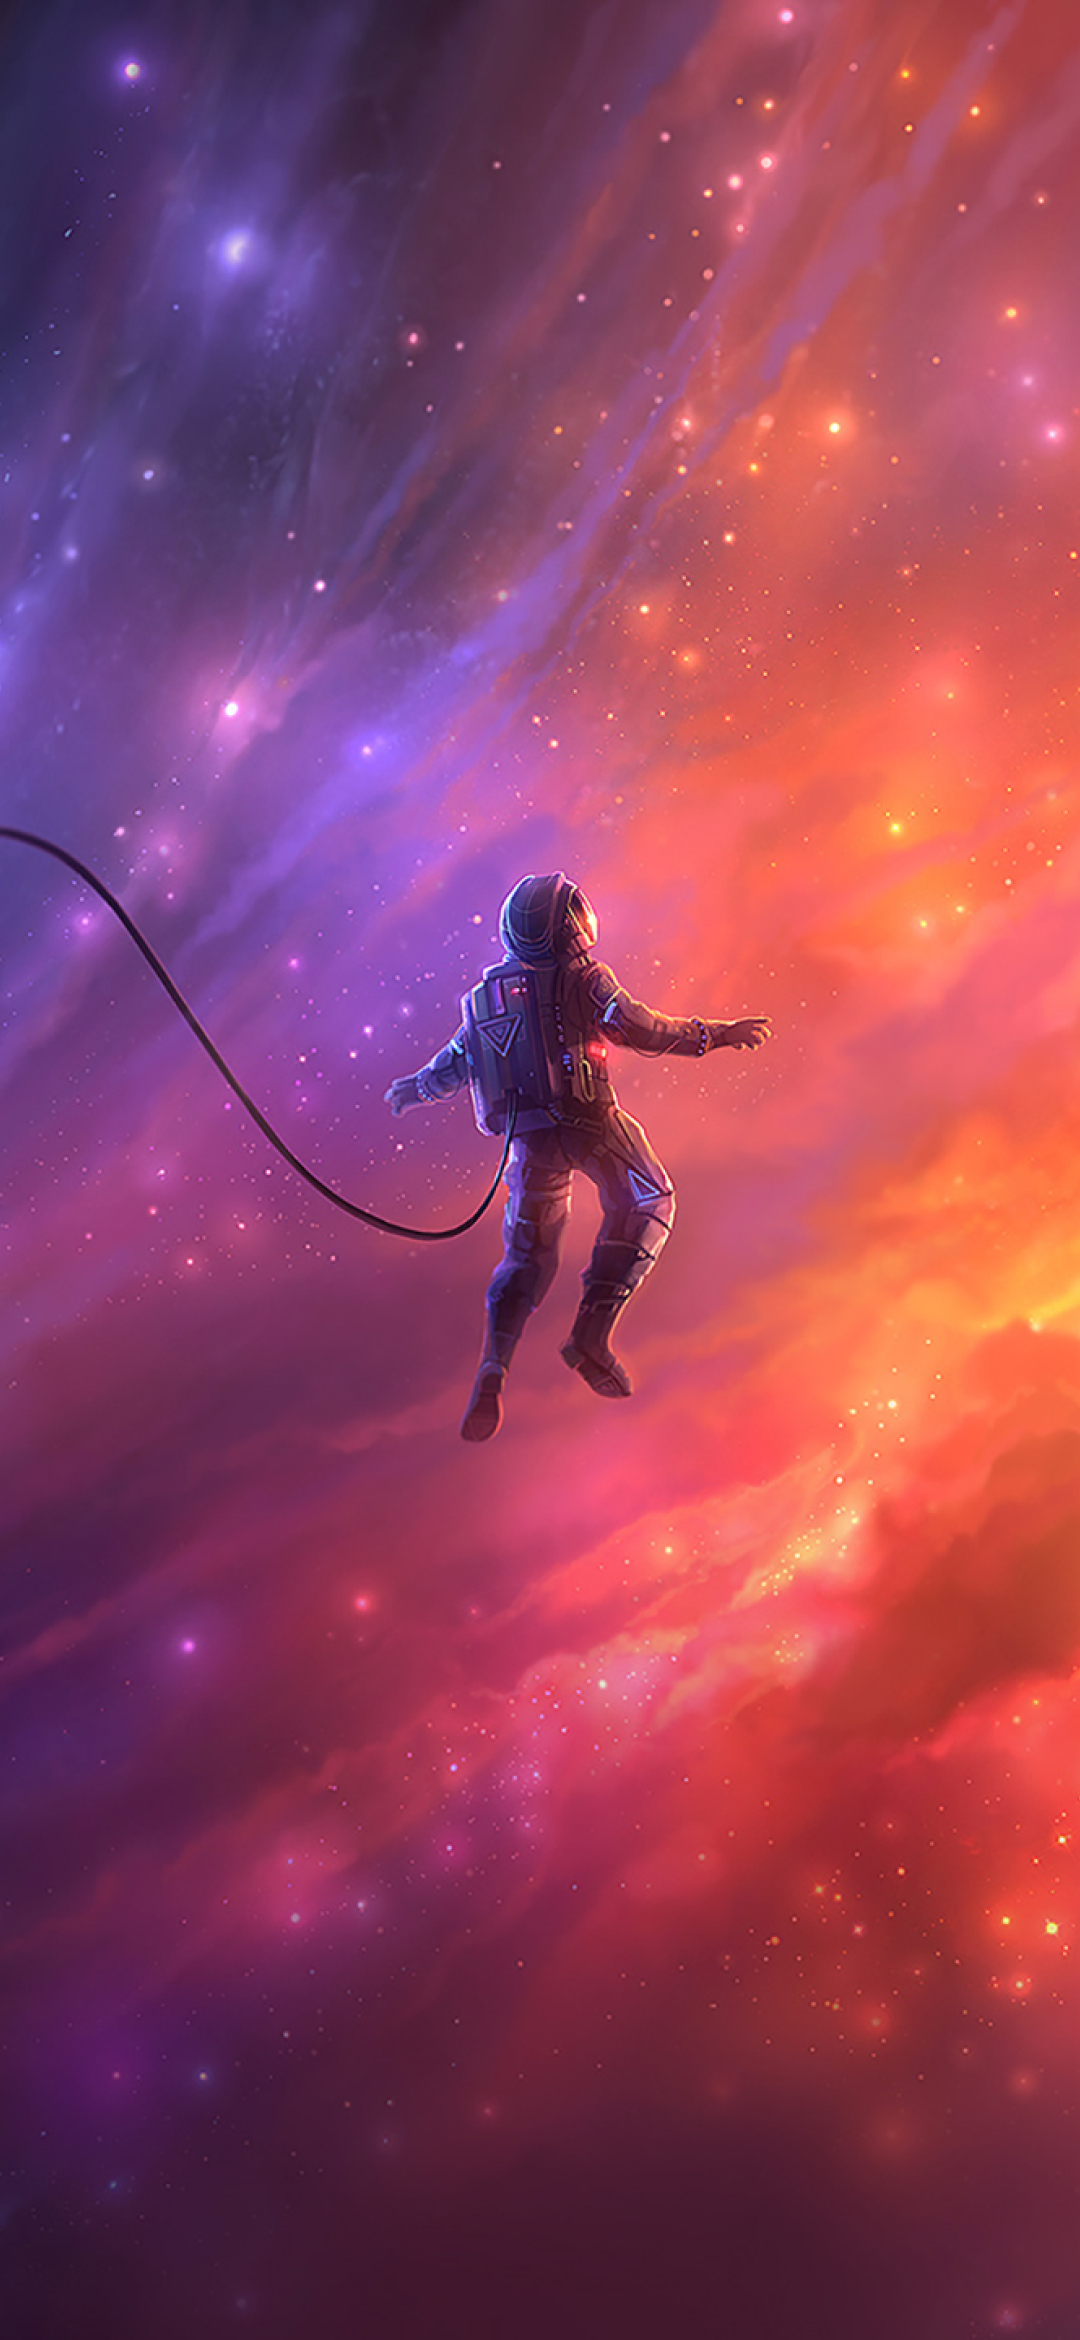 1080x2340 Astronaut In Space 1080x2340 Resolution ...